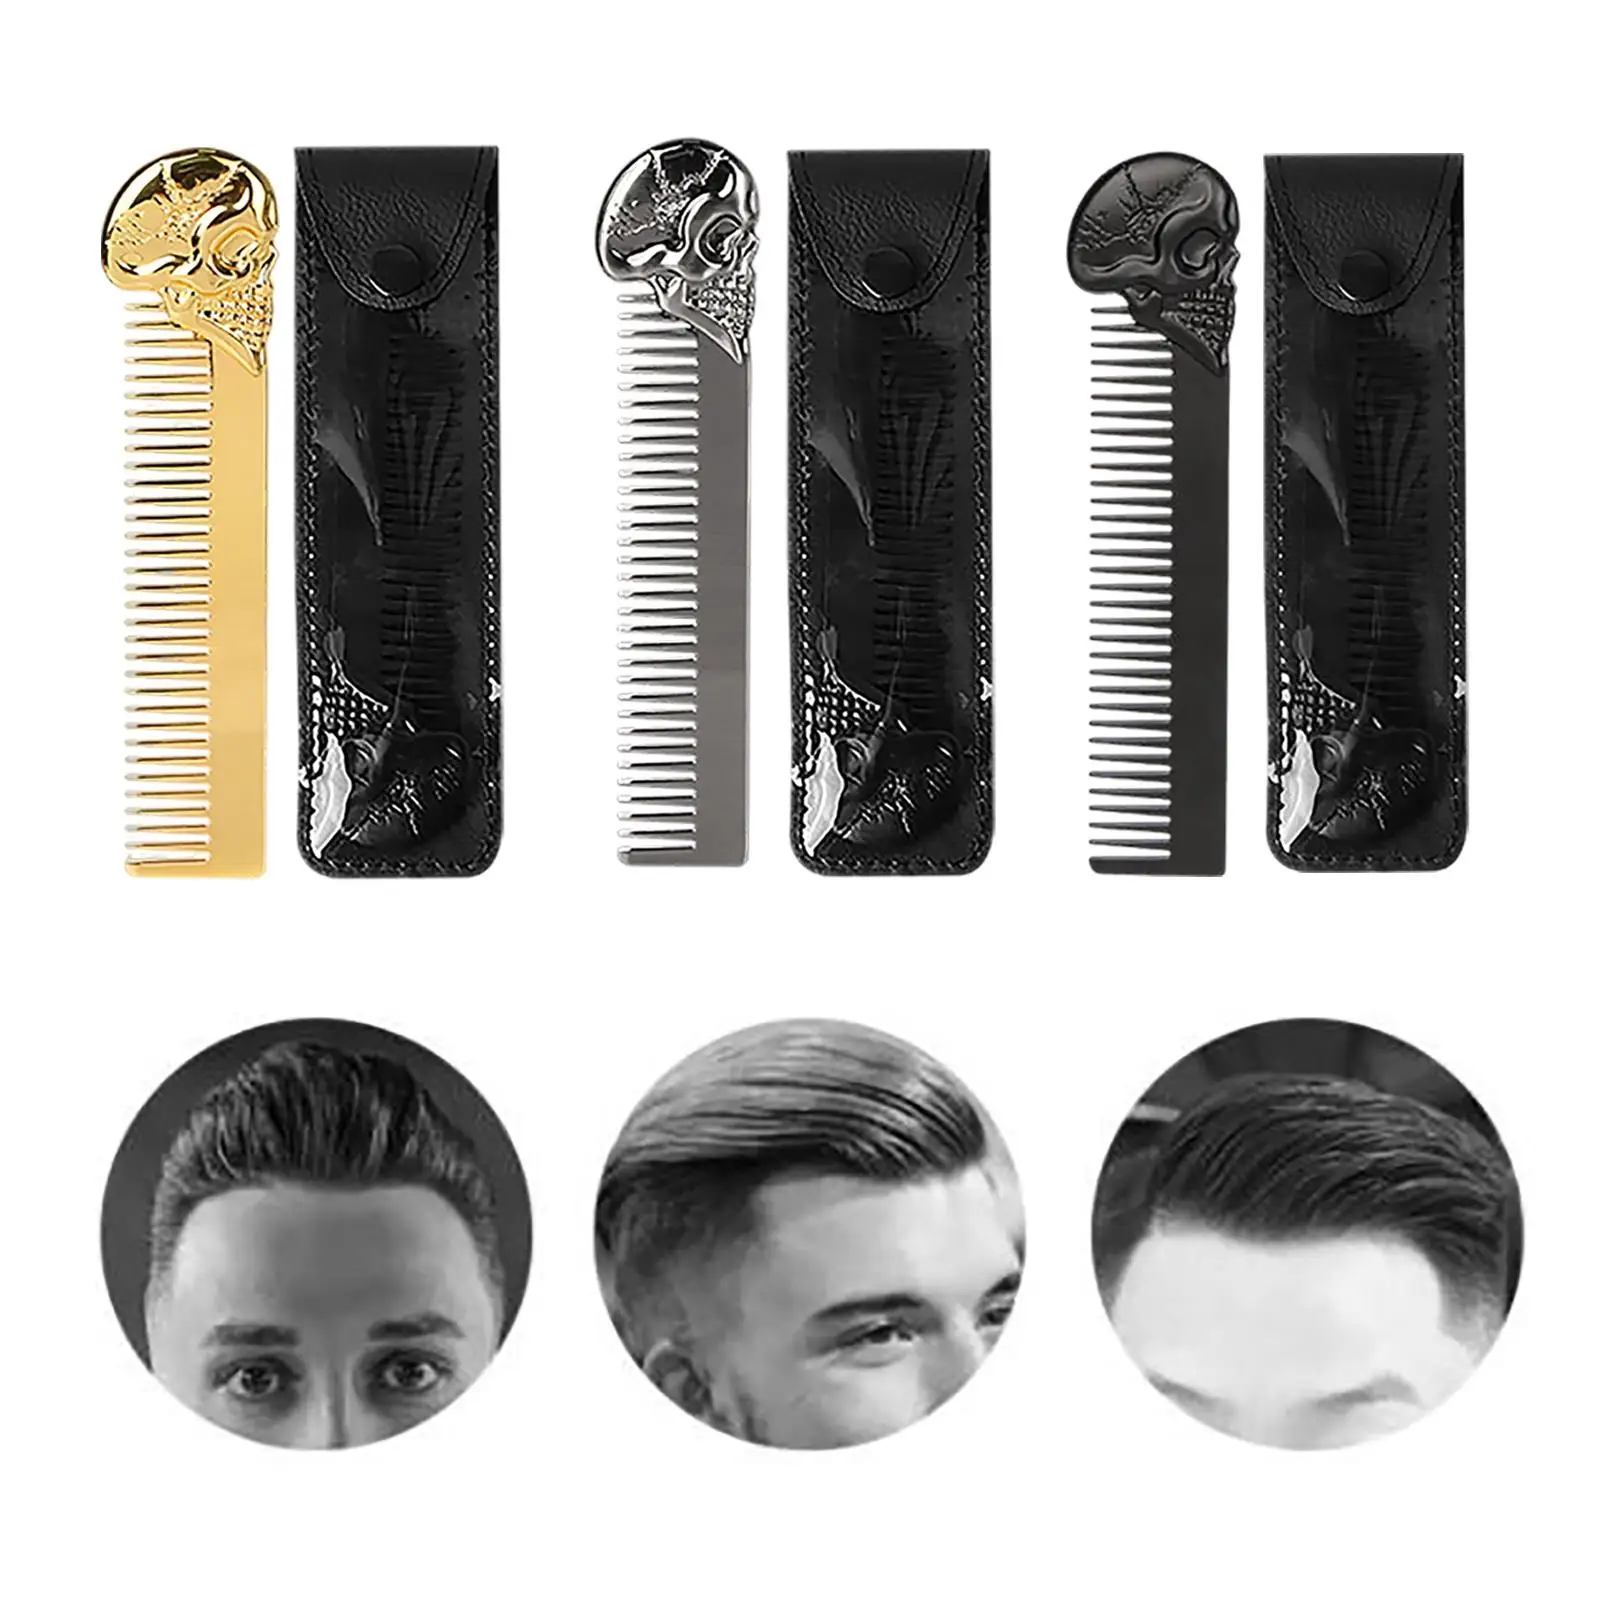 Men Beard Comb Fine Tooth   Grooming Hair Styling Trimming Tool